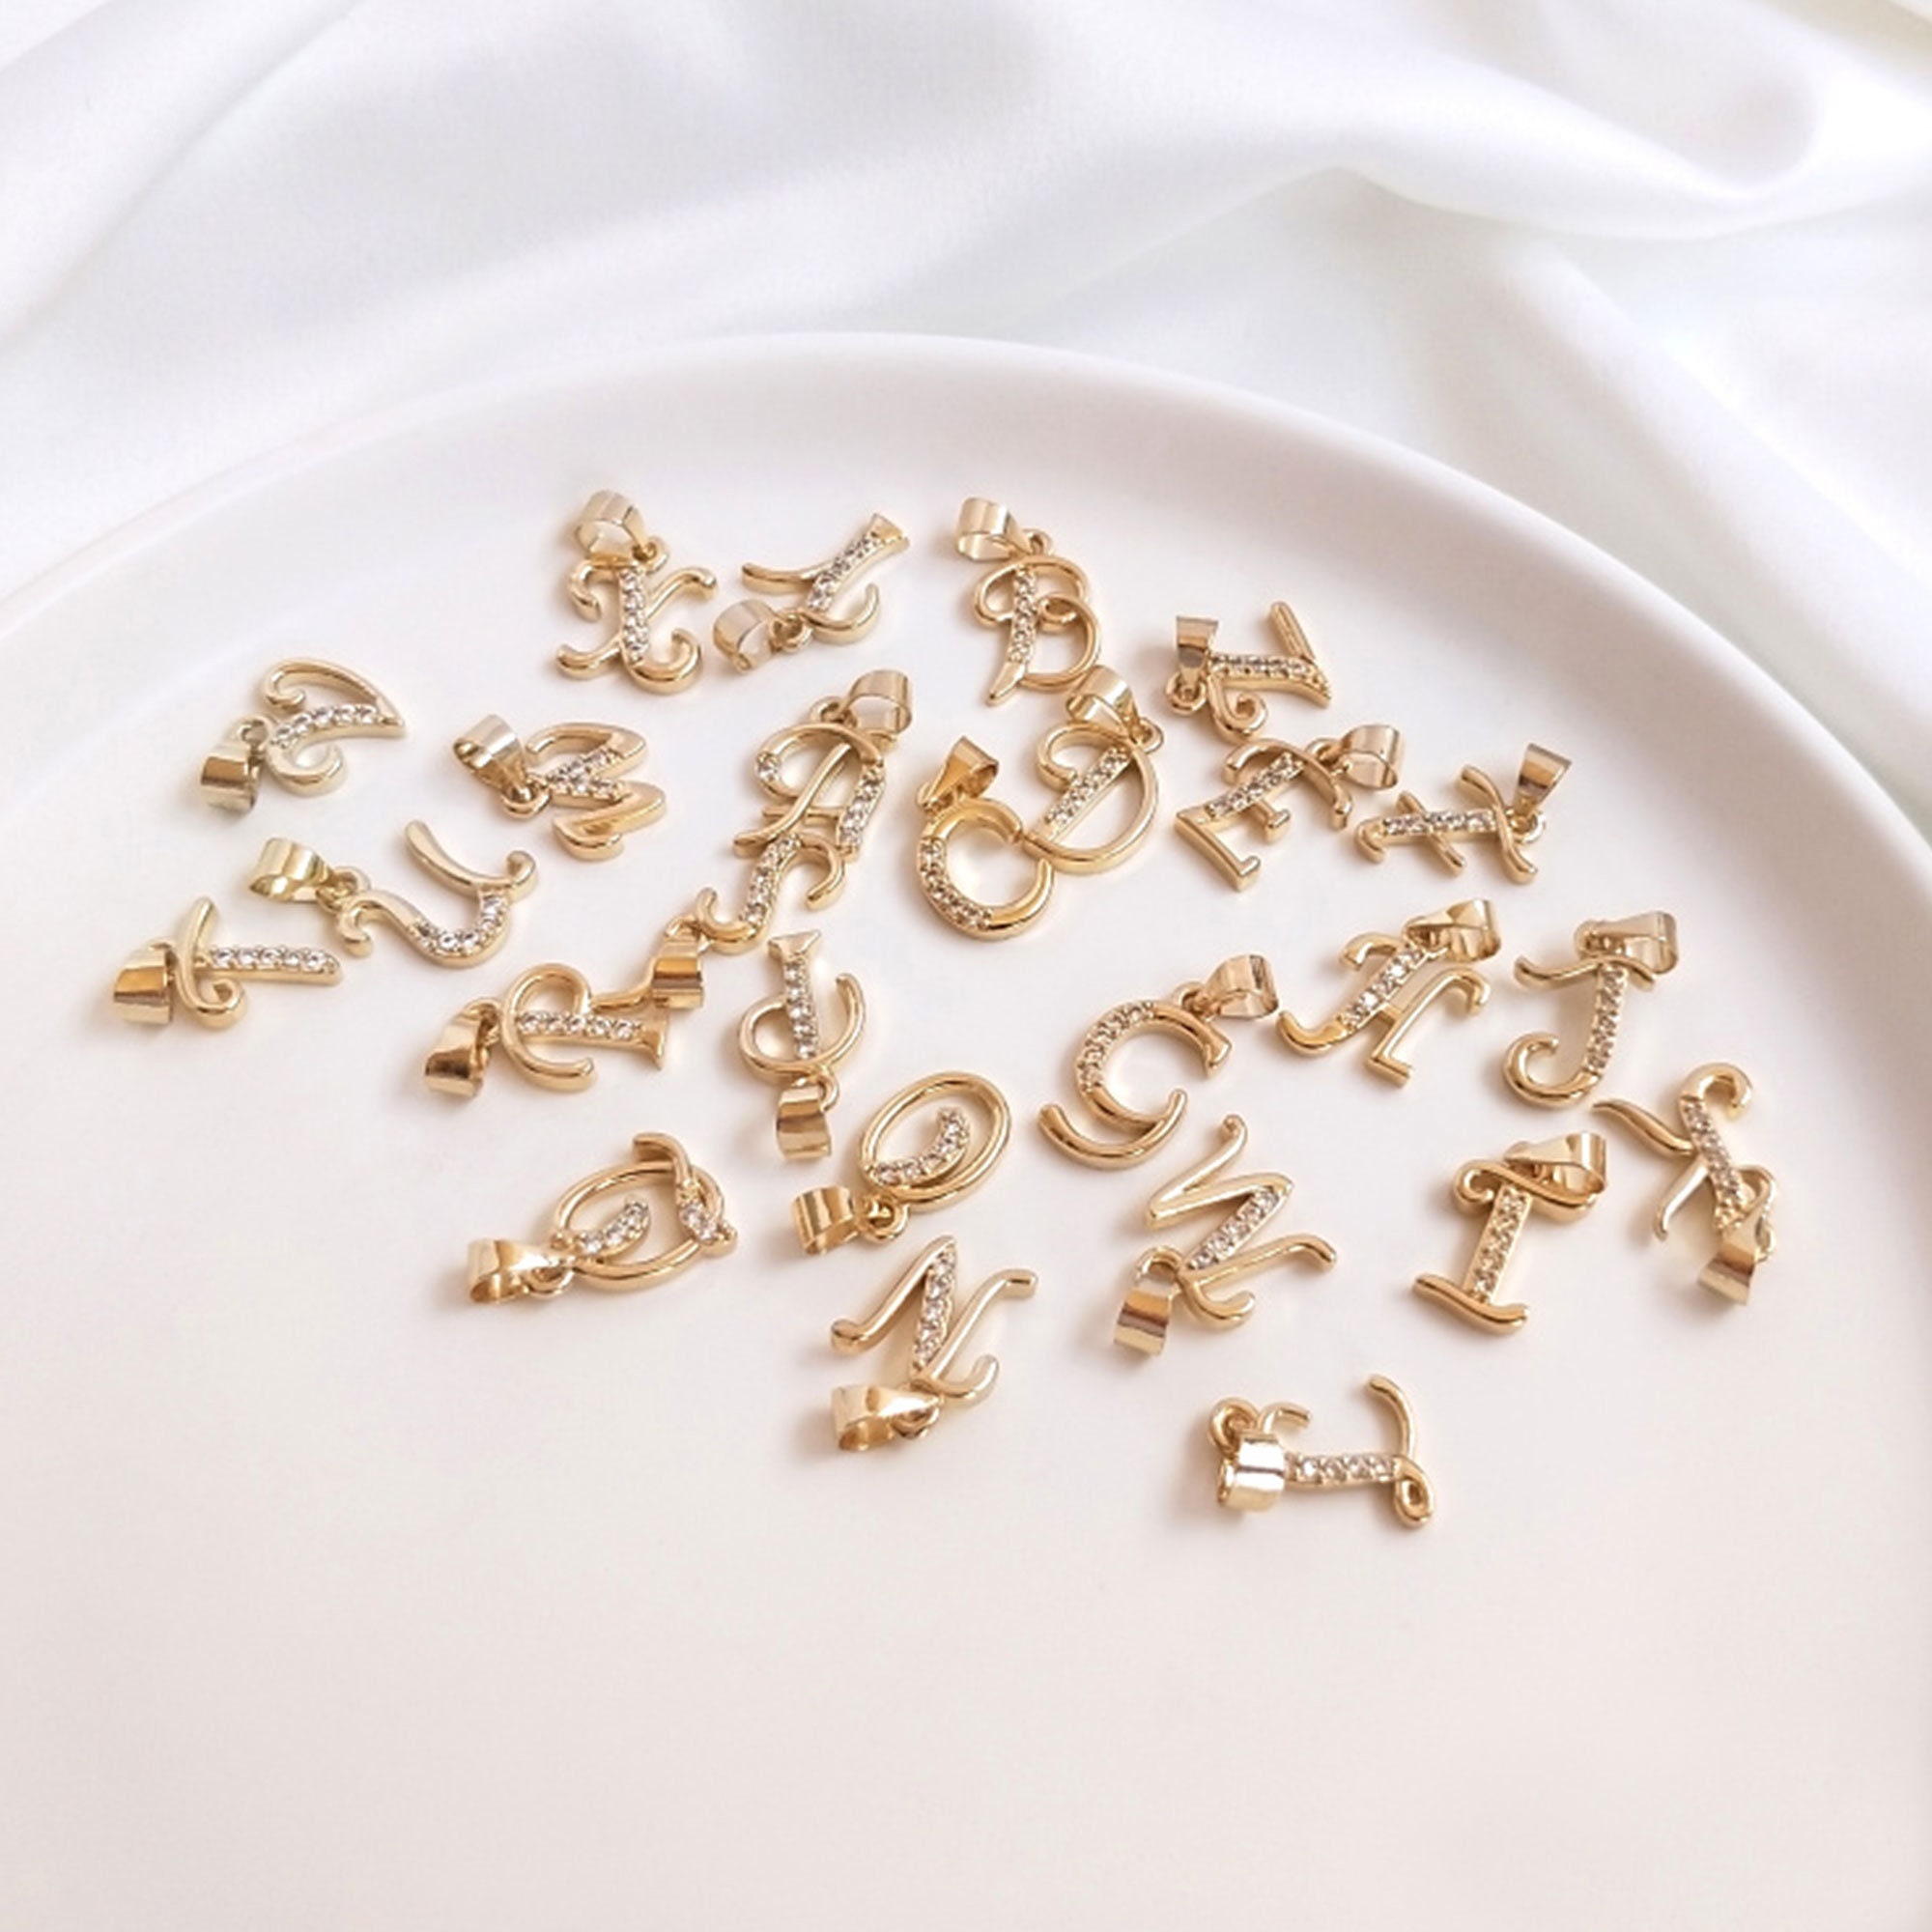 Charm-ALPHABET LETTERS-14x12mm Gold Plated (Pack of 26)